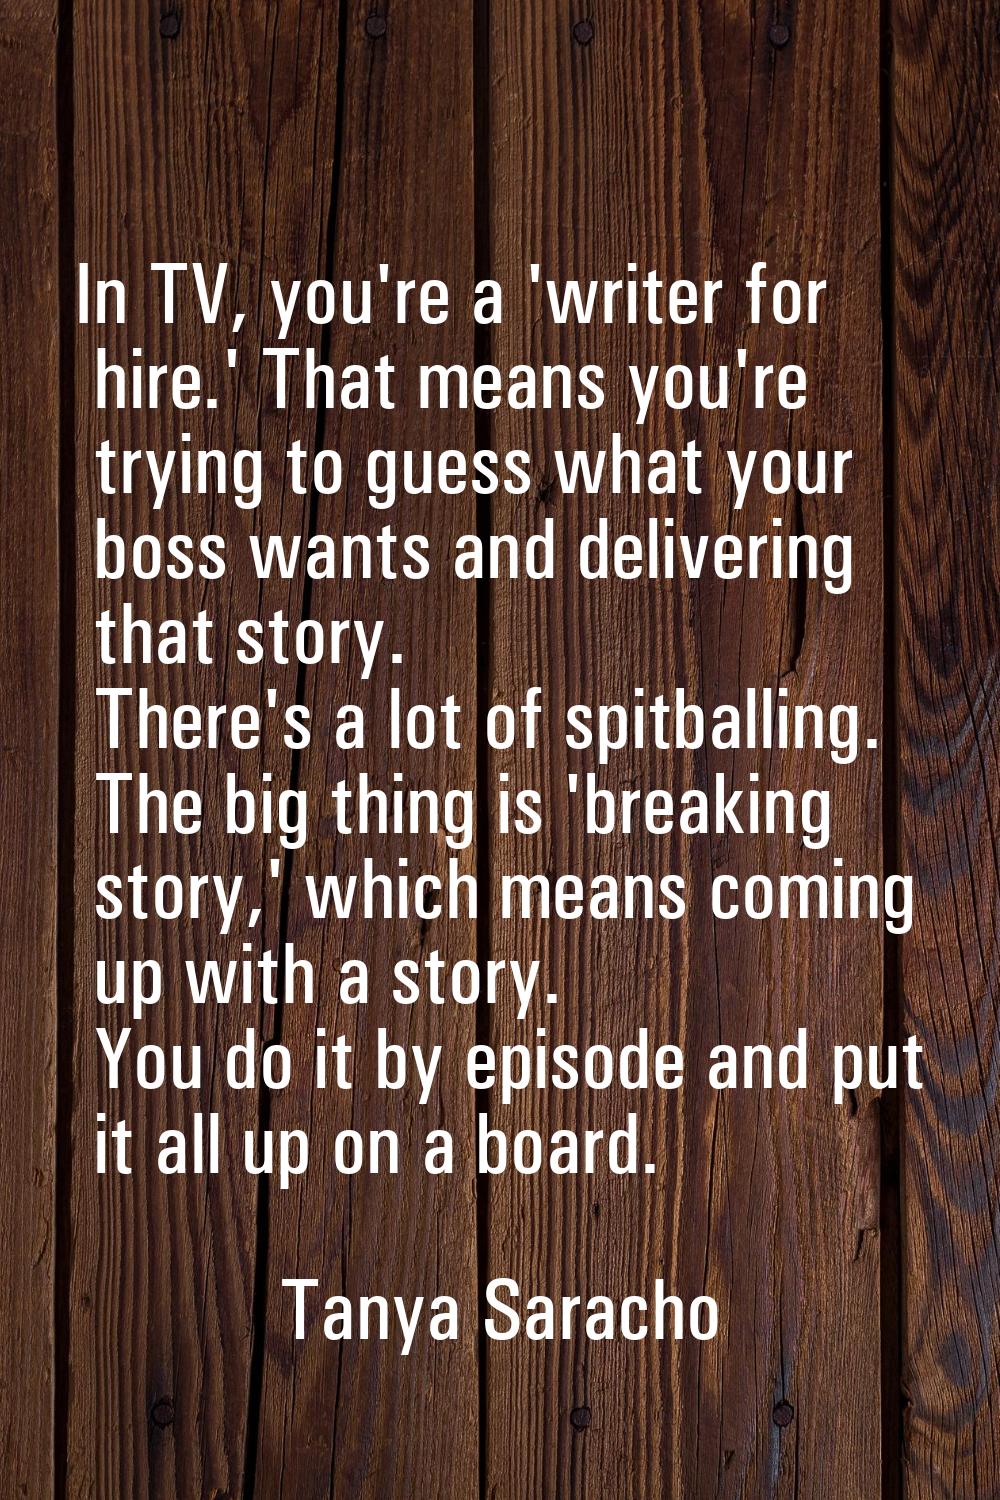 In TV, you're a 'writer for hire.' That means you're trying to guess what your boss wants and deliv